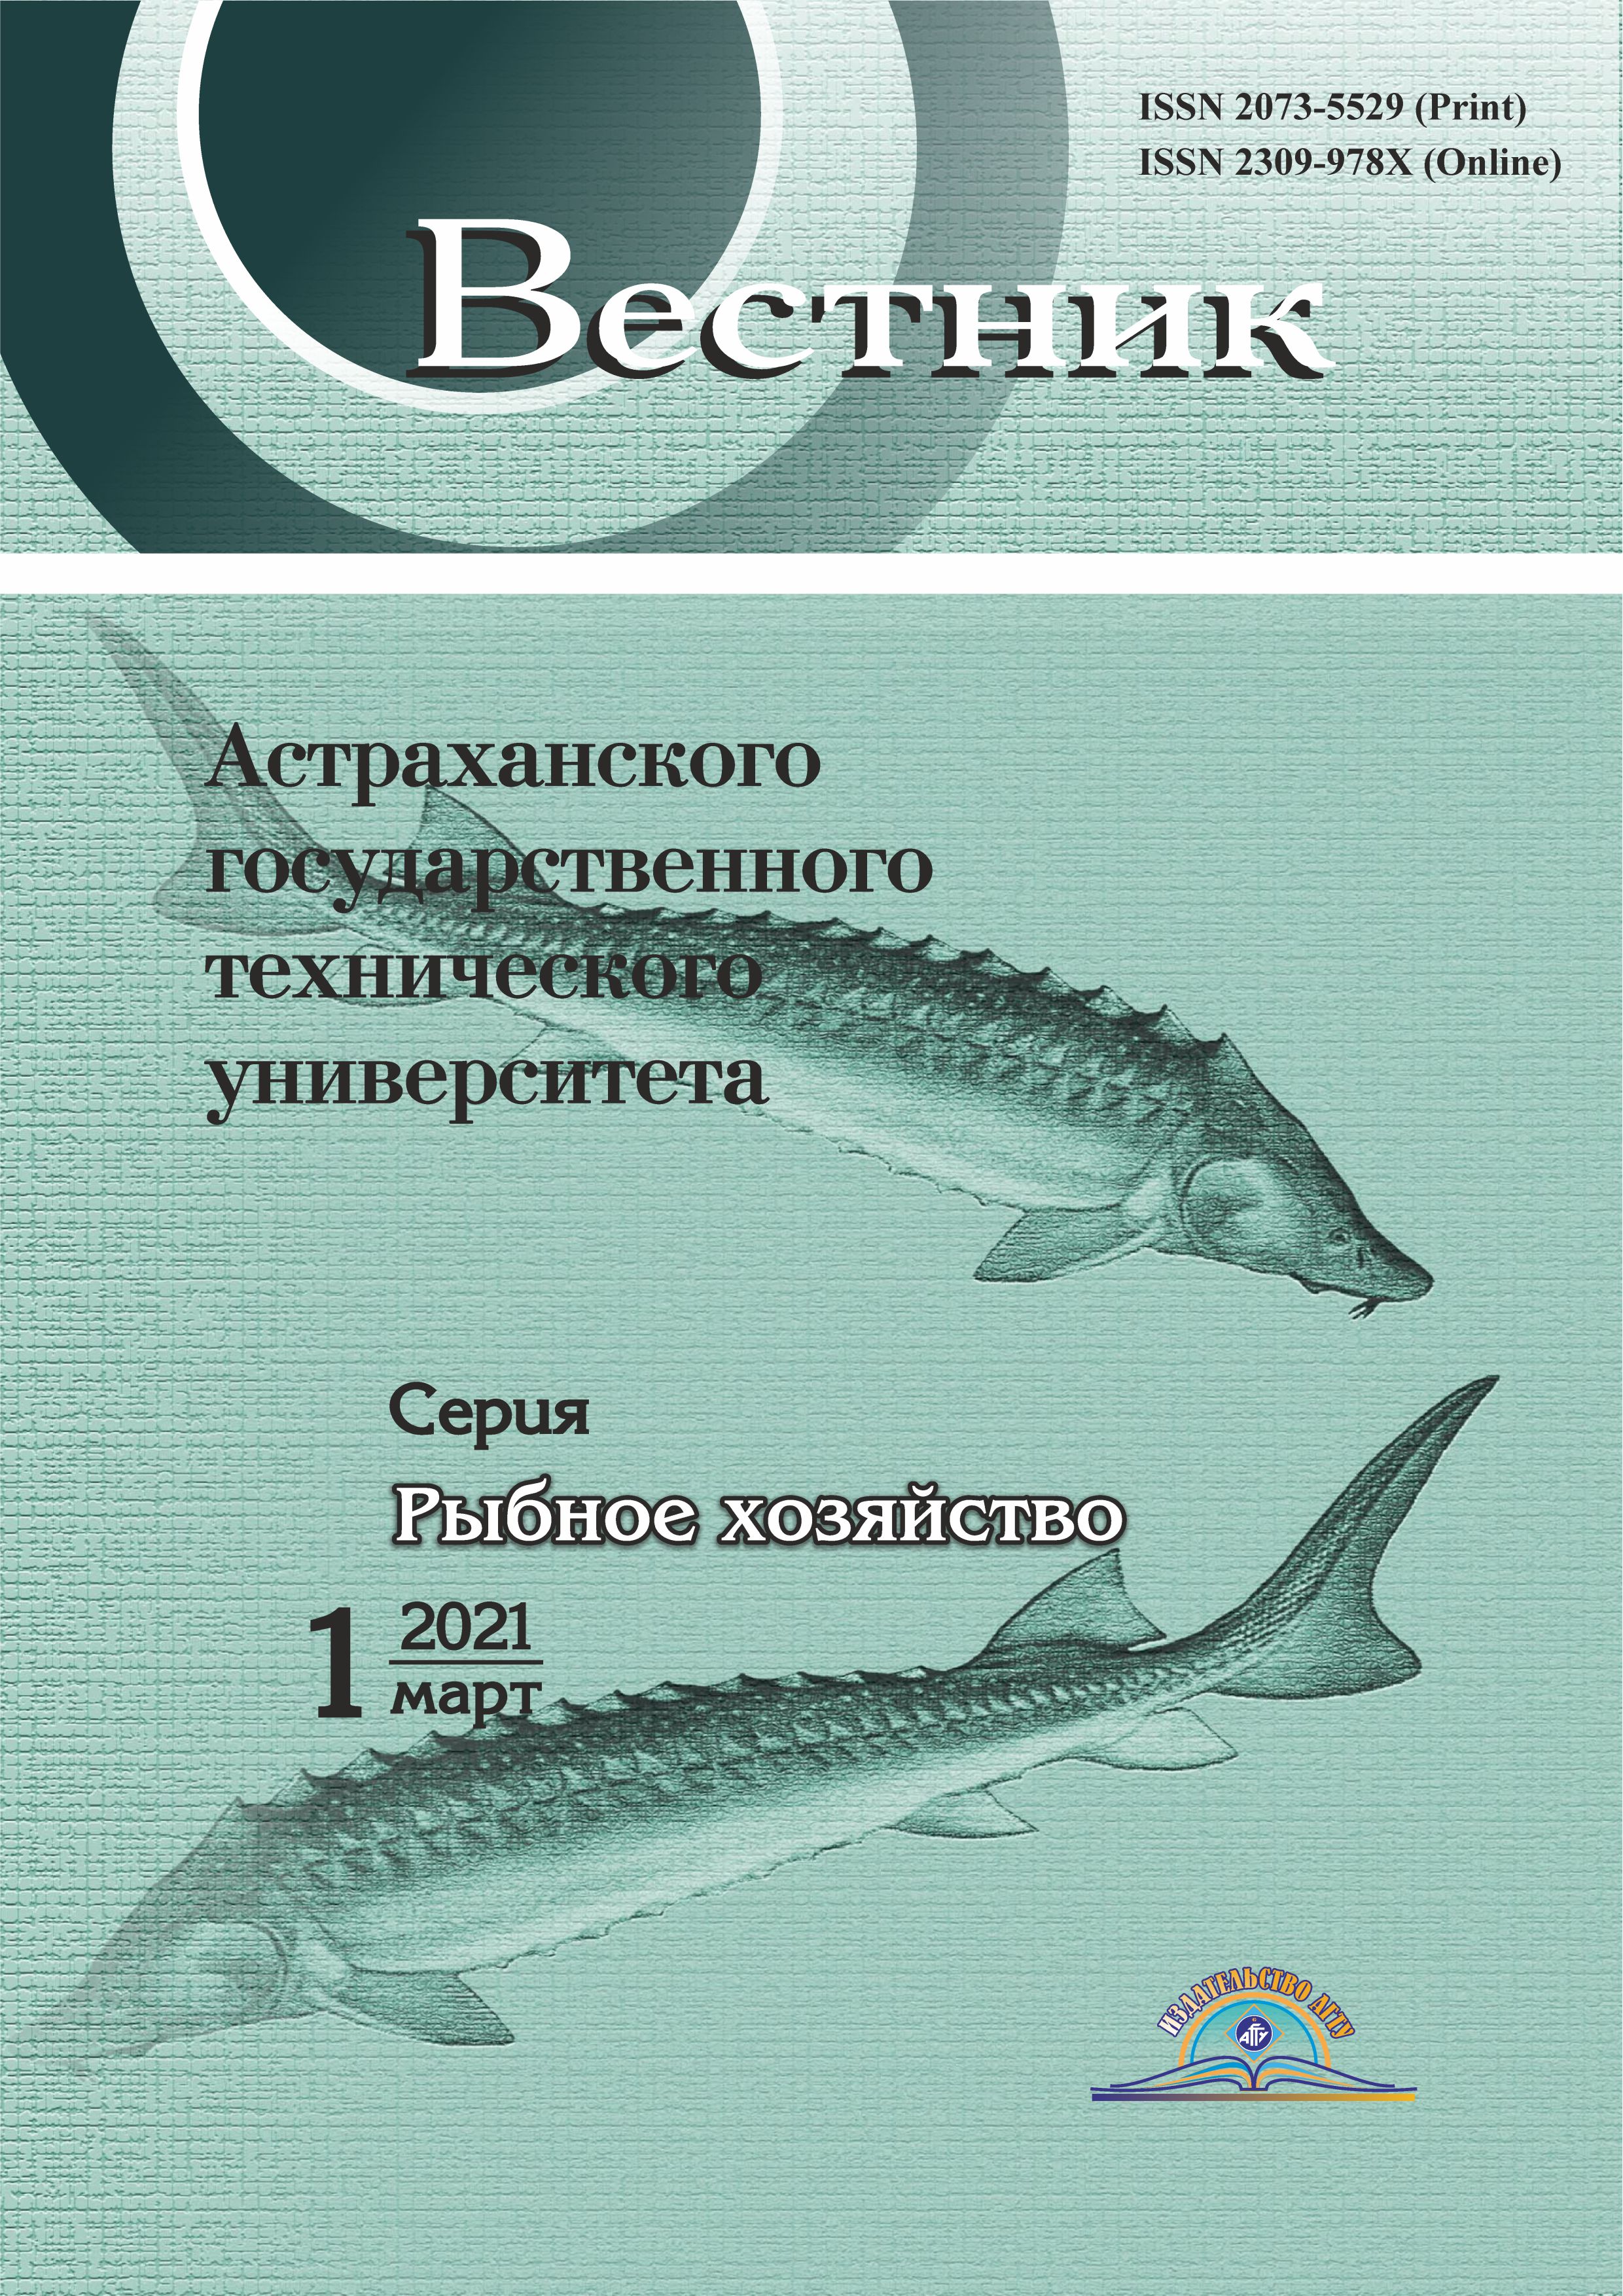                         ASSESTMENT OF FEMALE REPRODUCTIVE FUNCTION IN PADDLEFISH (POLYODON SPATHULA) REARED IN POND CONDITIONS IN ASTRAKHAN REGION
            